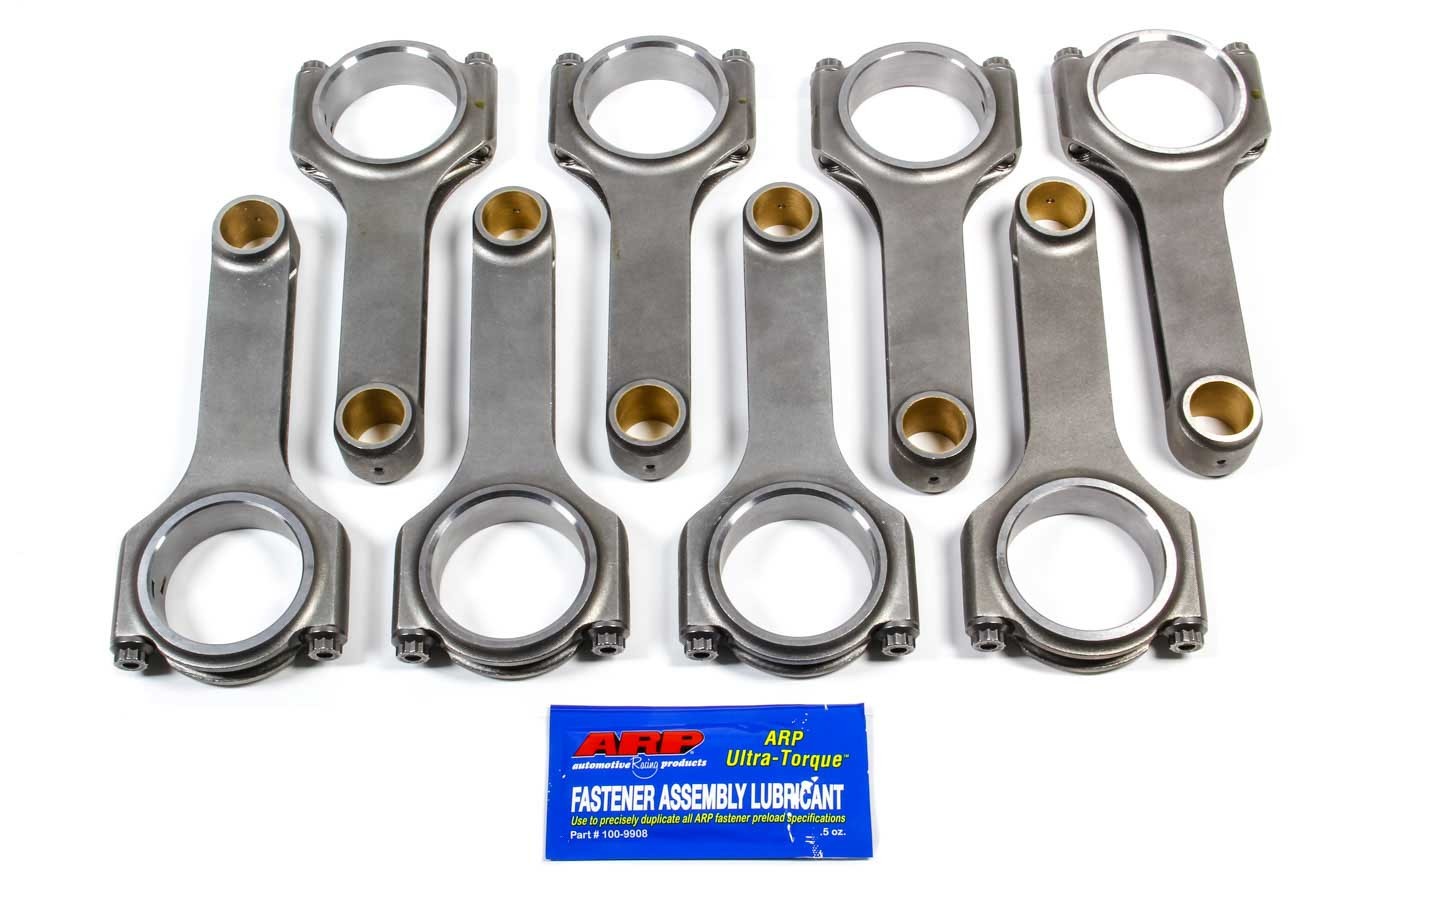 Scat 2-350-6000-2100A Connecting Rod, Pro Sport, H Beam, 6.000 in Long, Bushed, 7/16 in Cap Screws, ARP2000, Forged Steel, Small Block Chevy, Set of 8